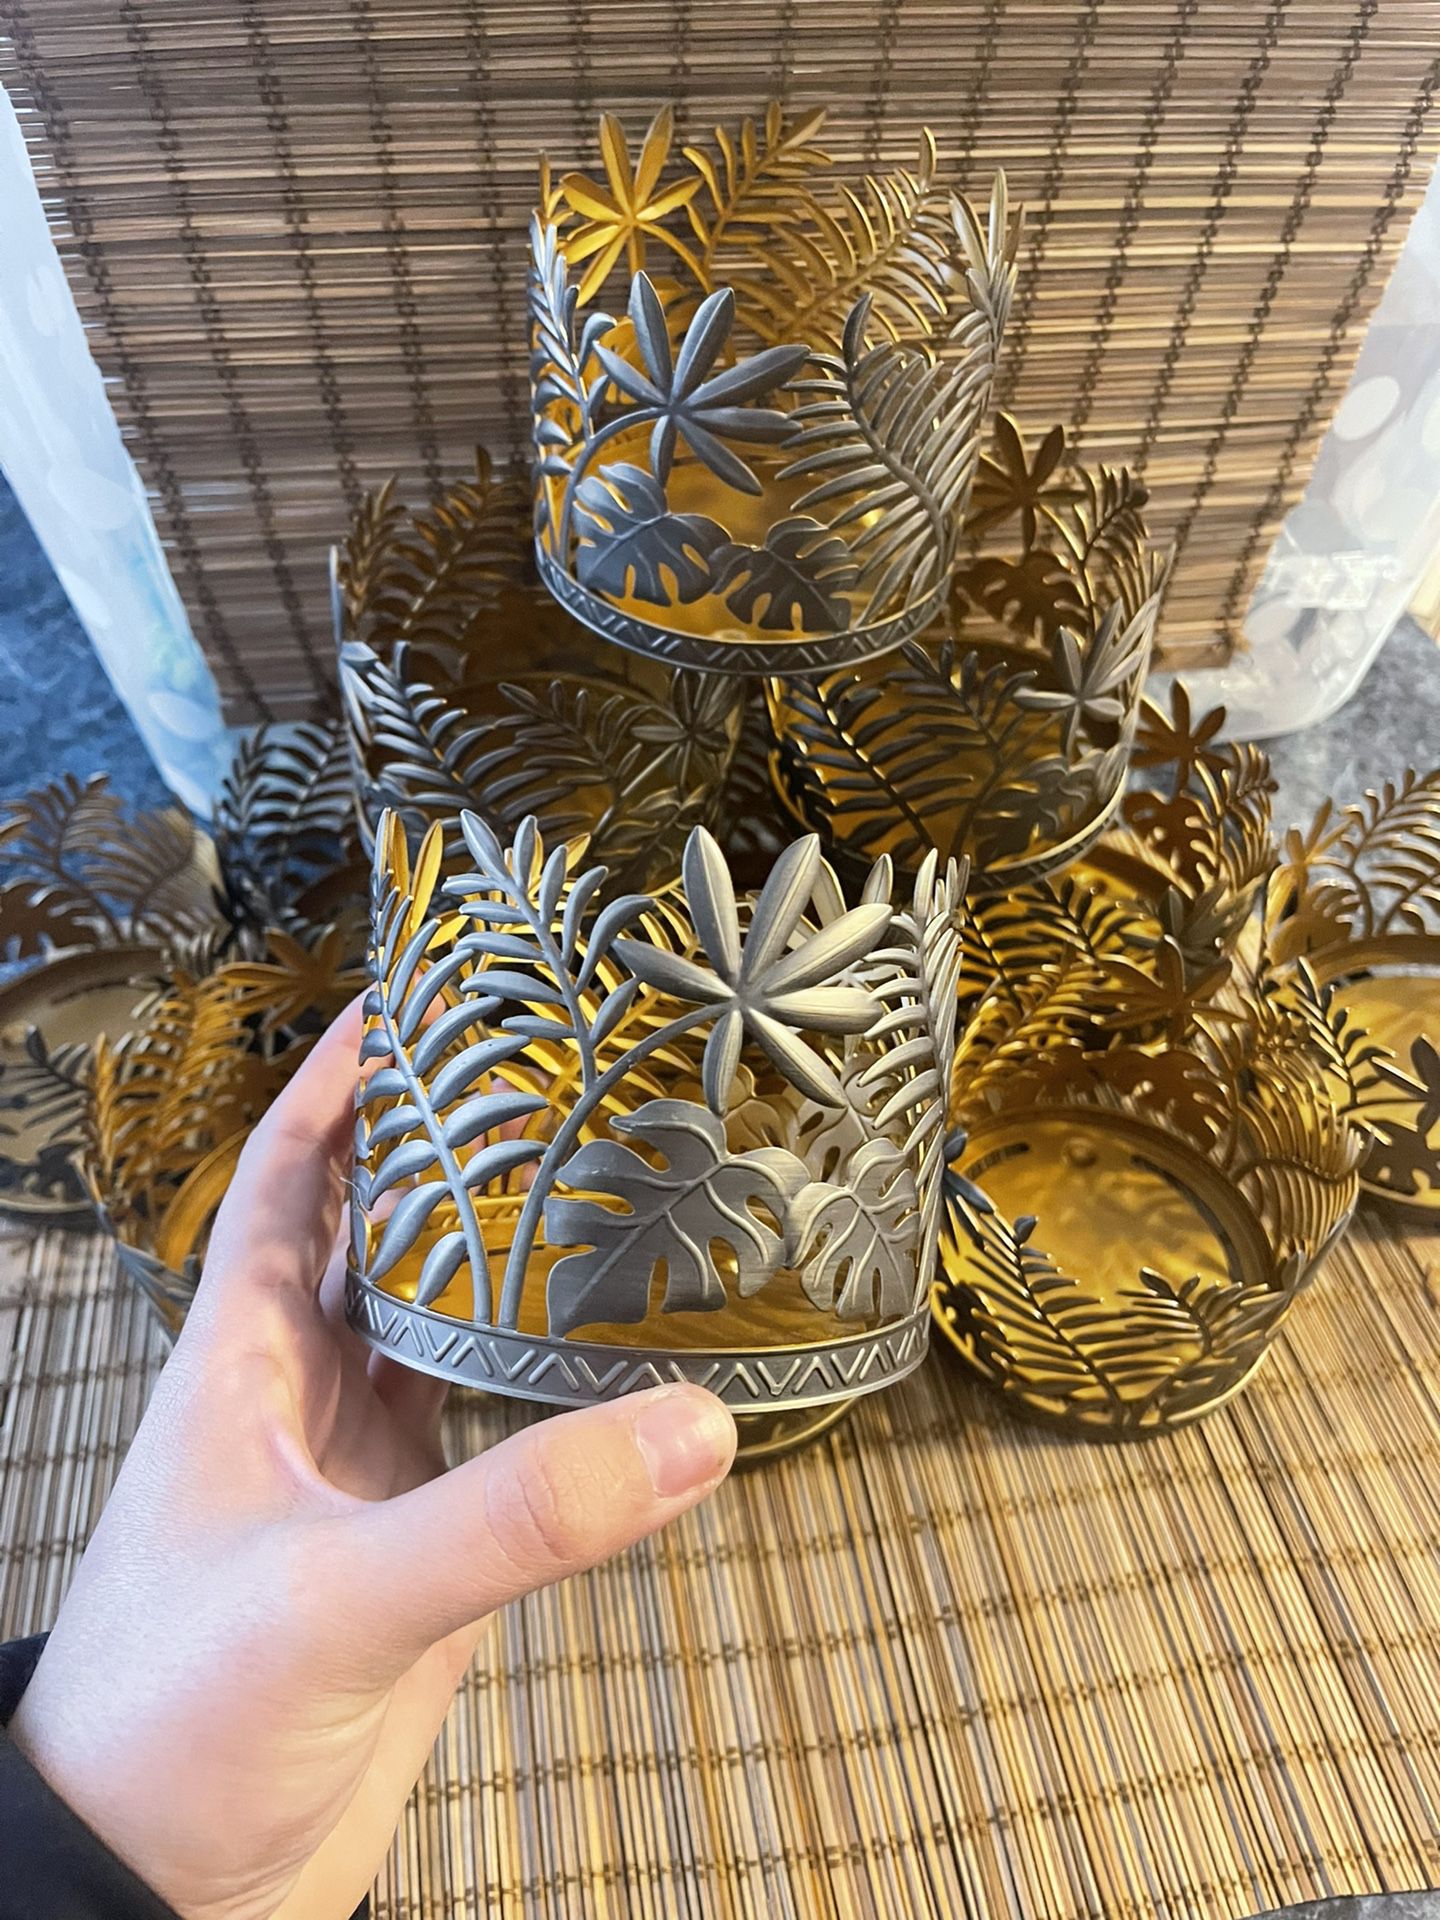 BBW 3-Wick tropical Candle Holders - $7 Each